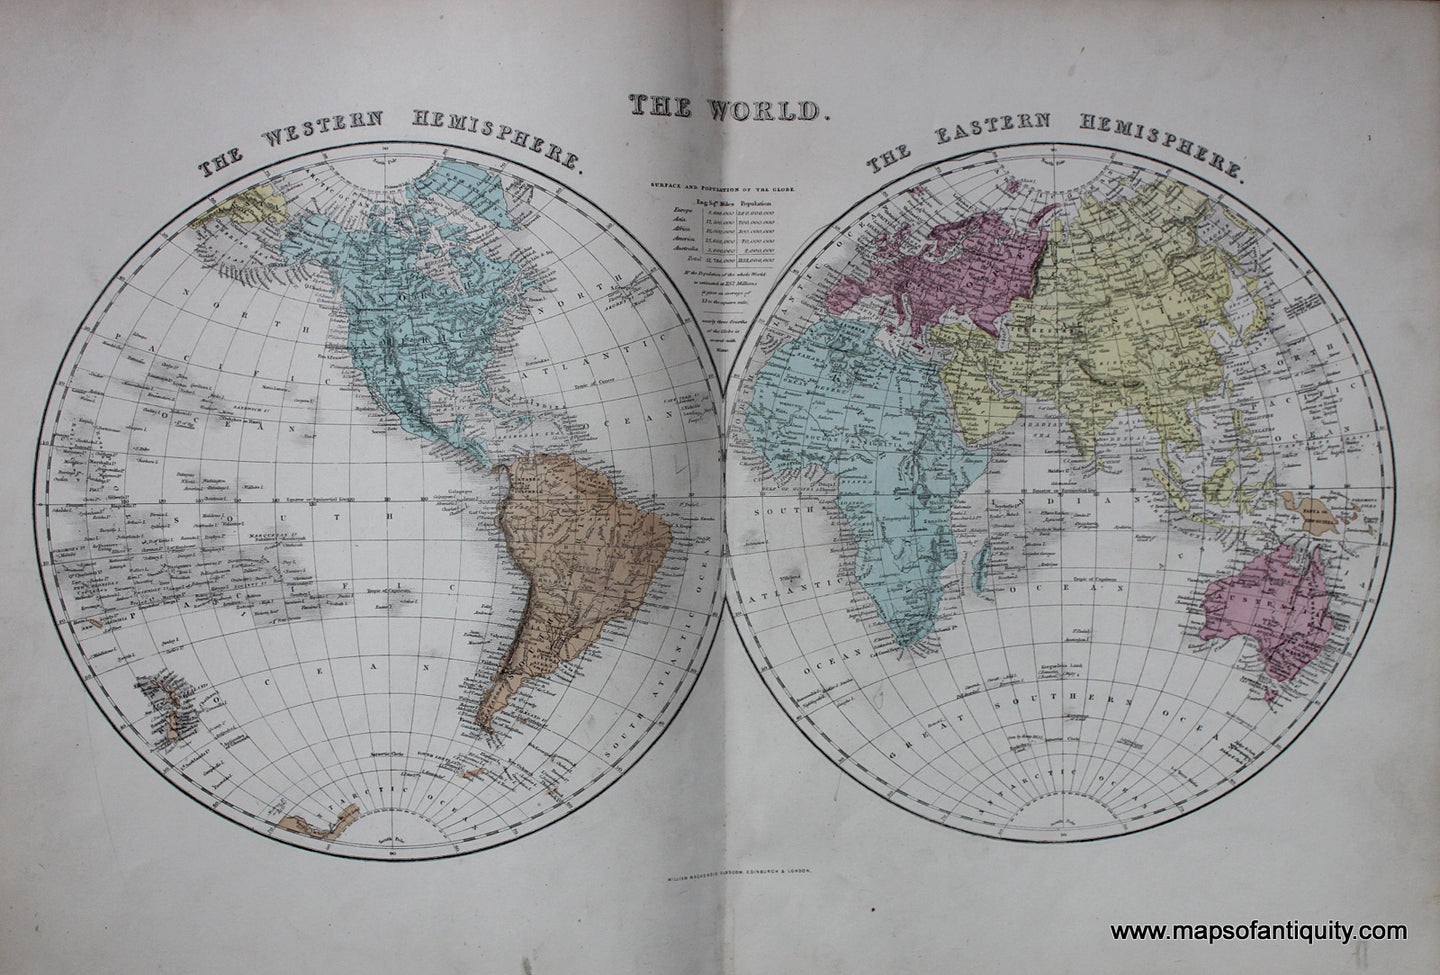 Antique-Hand-Colored-Map-The-World.-World--1865-MacKenzie-Maps-Of-Antiquity